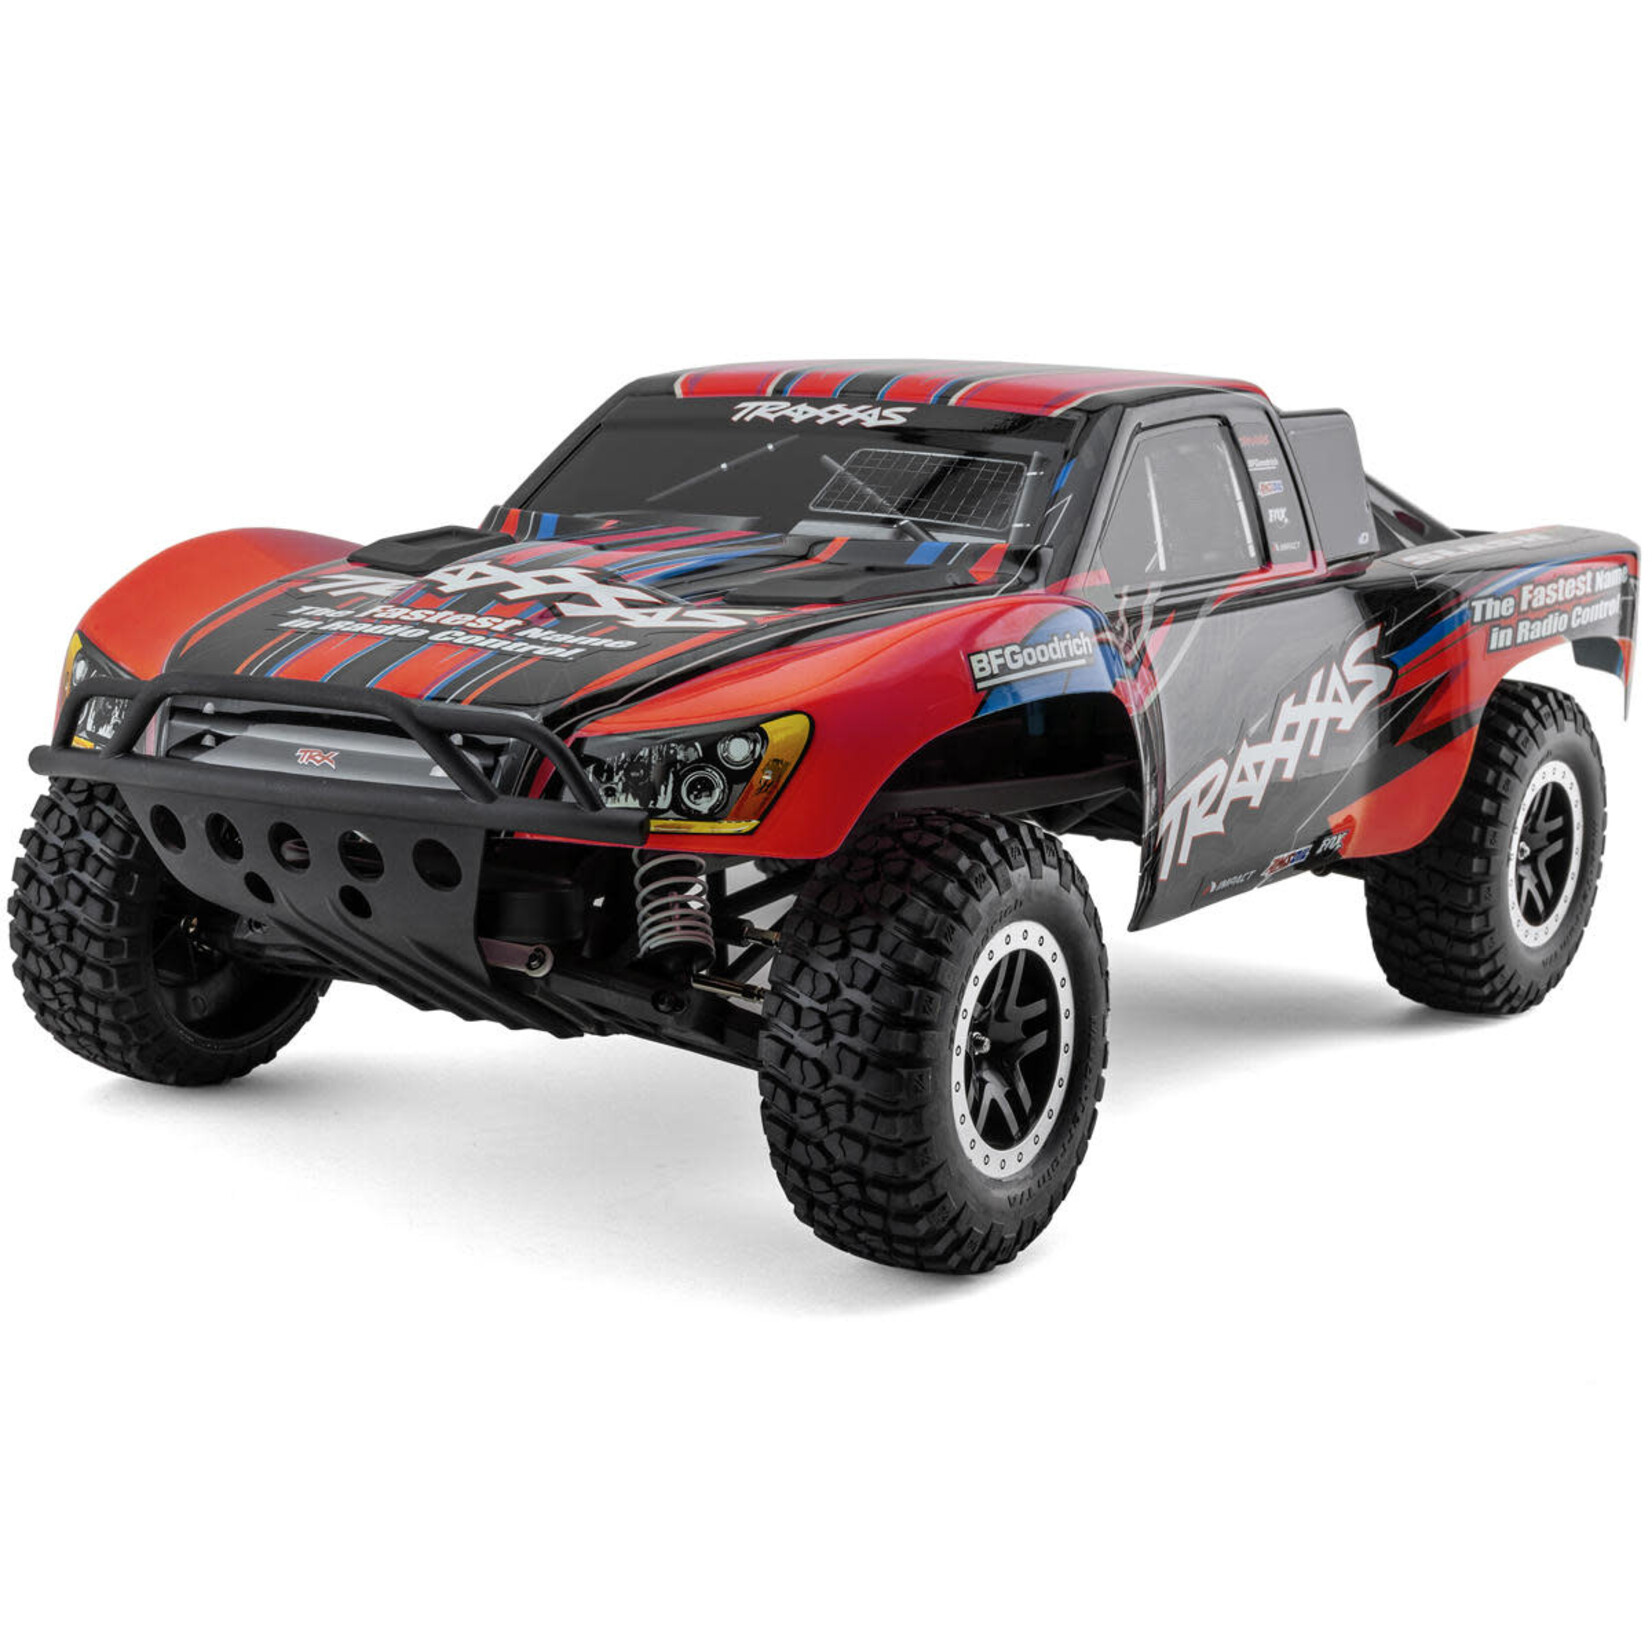 Traxxas Traxxas Slash BL-2S 1/10 RTR 2WD Brushless Short Course Truck (Red) w/BL-2S ESC & TQ 2.4GHz Radio #58134-4-RED